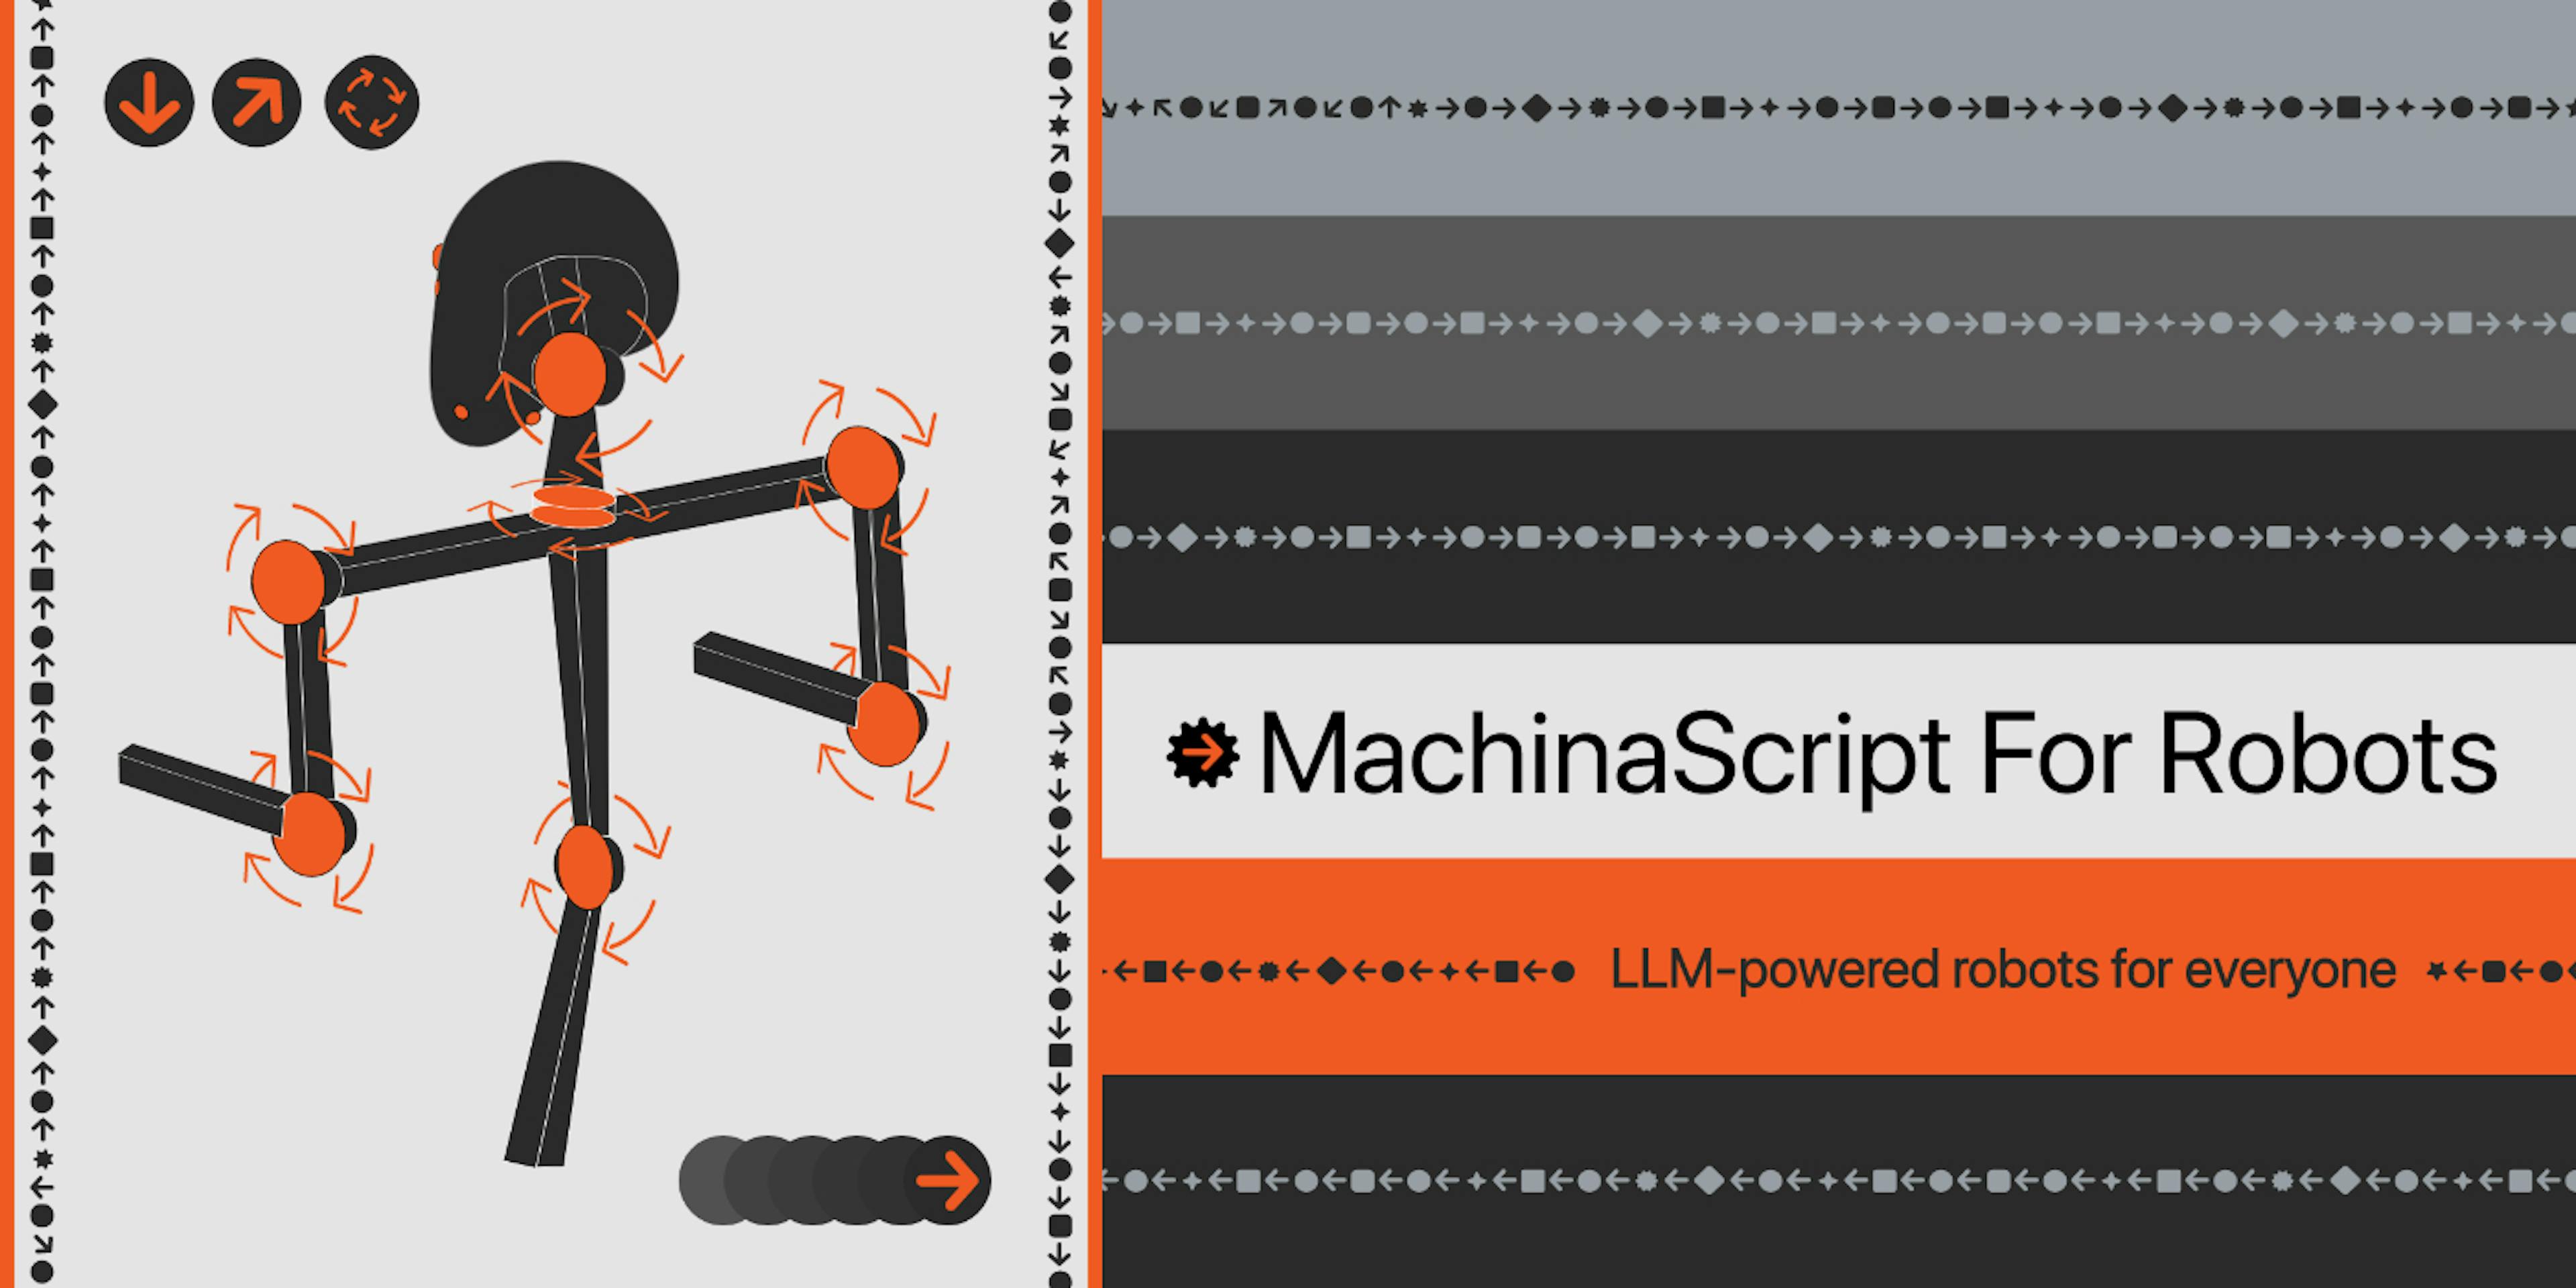 featured image - Introducing LLM-Powered Robots: MachinaScript for Robots